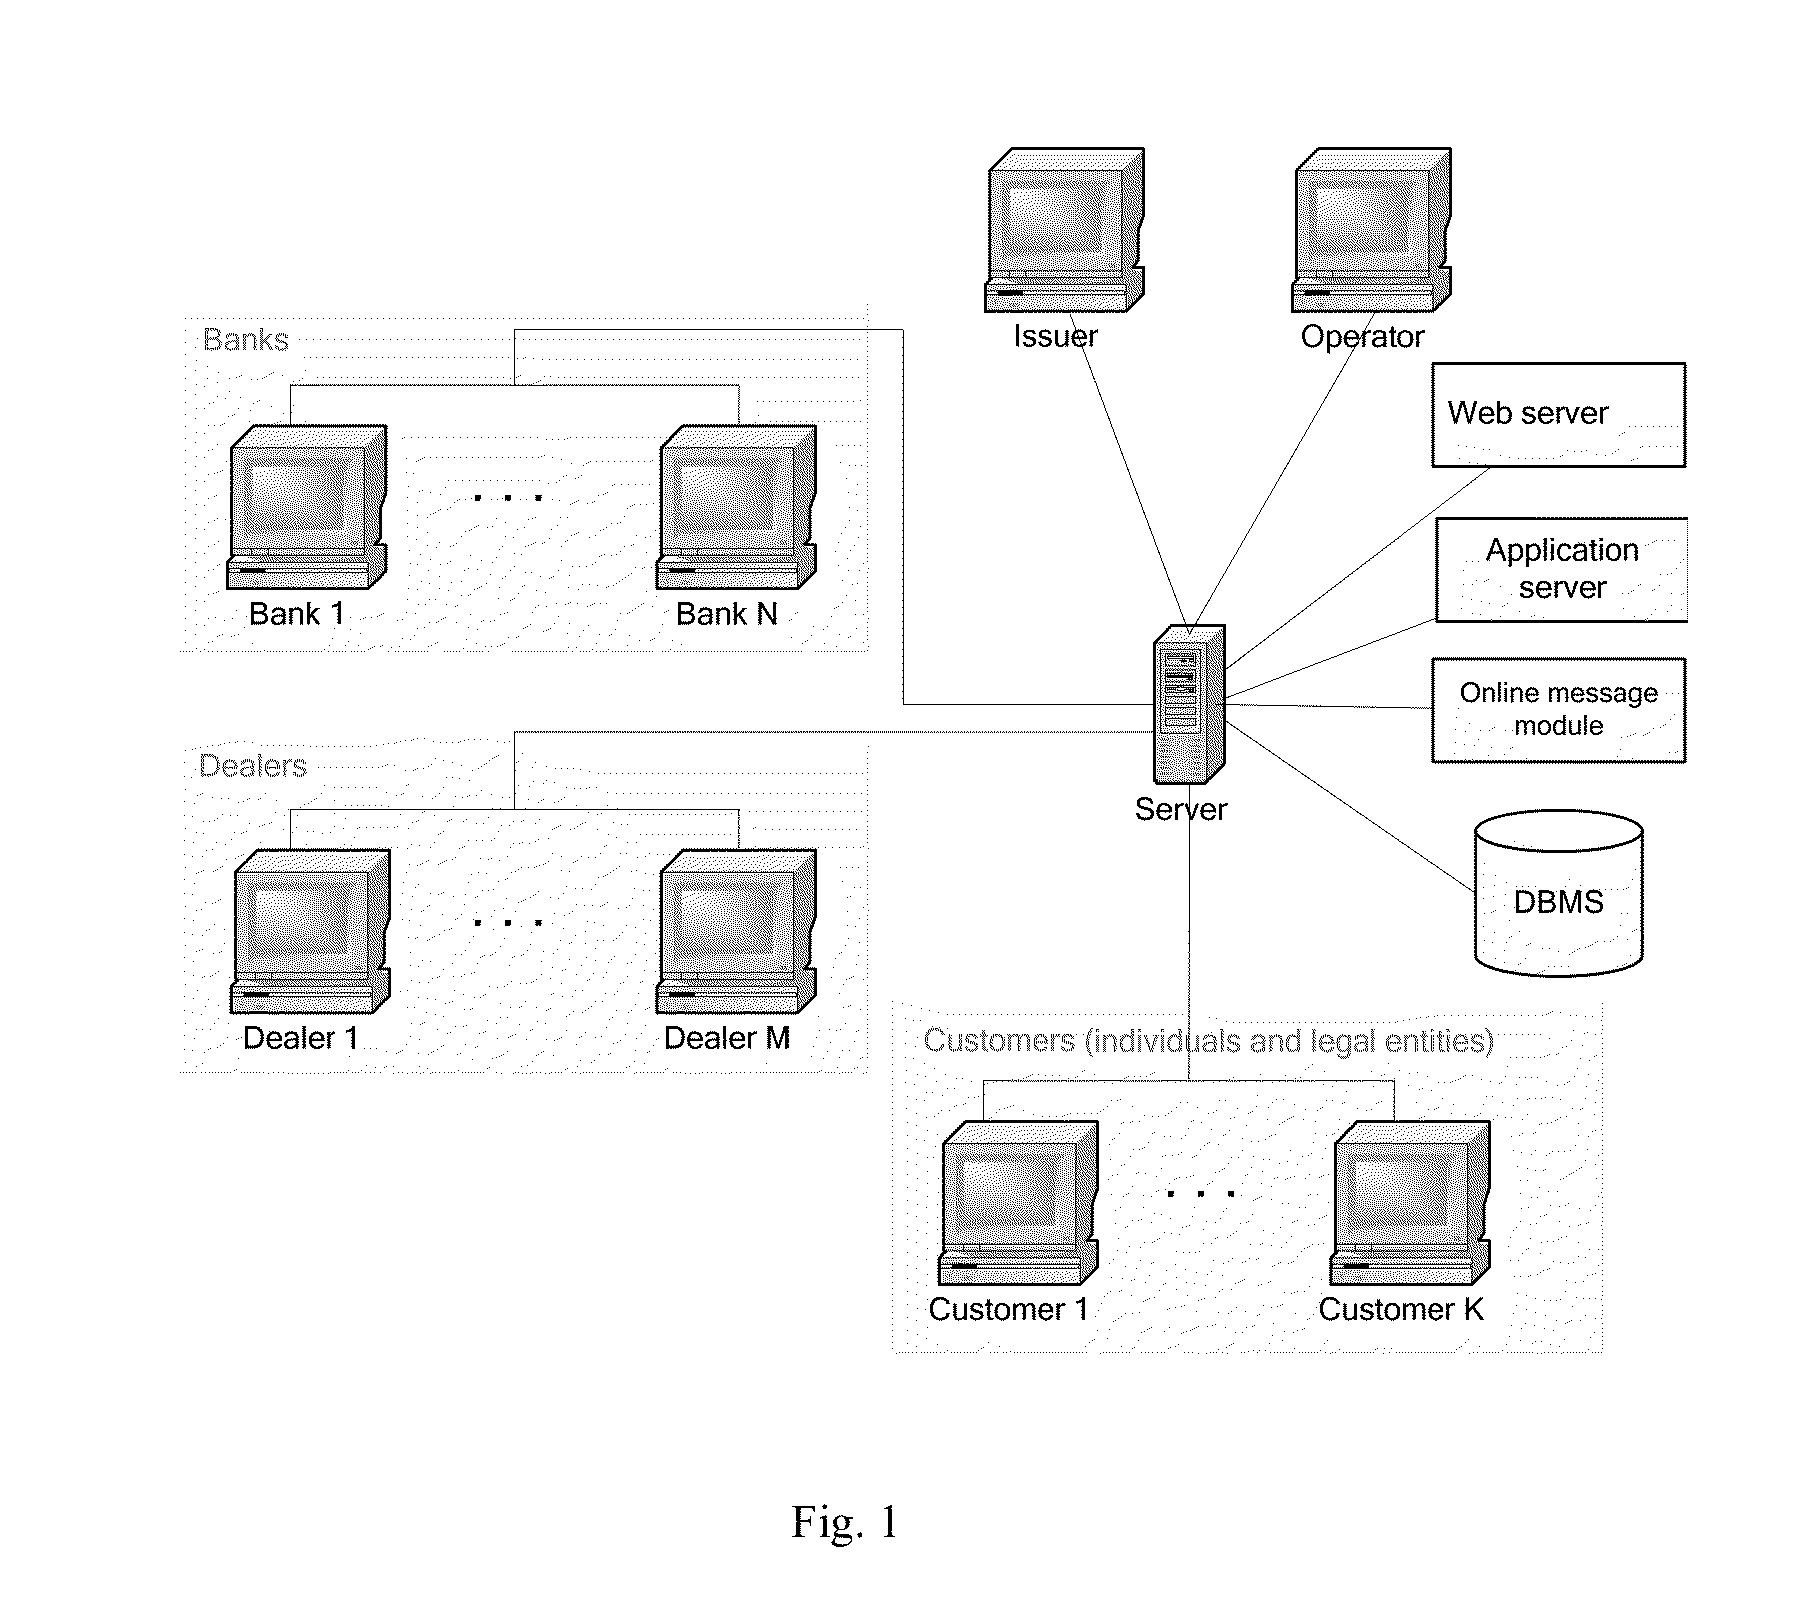 Electronic check-based payment system and methods for issuing, transferring, paying and verifying electronic checks